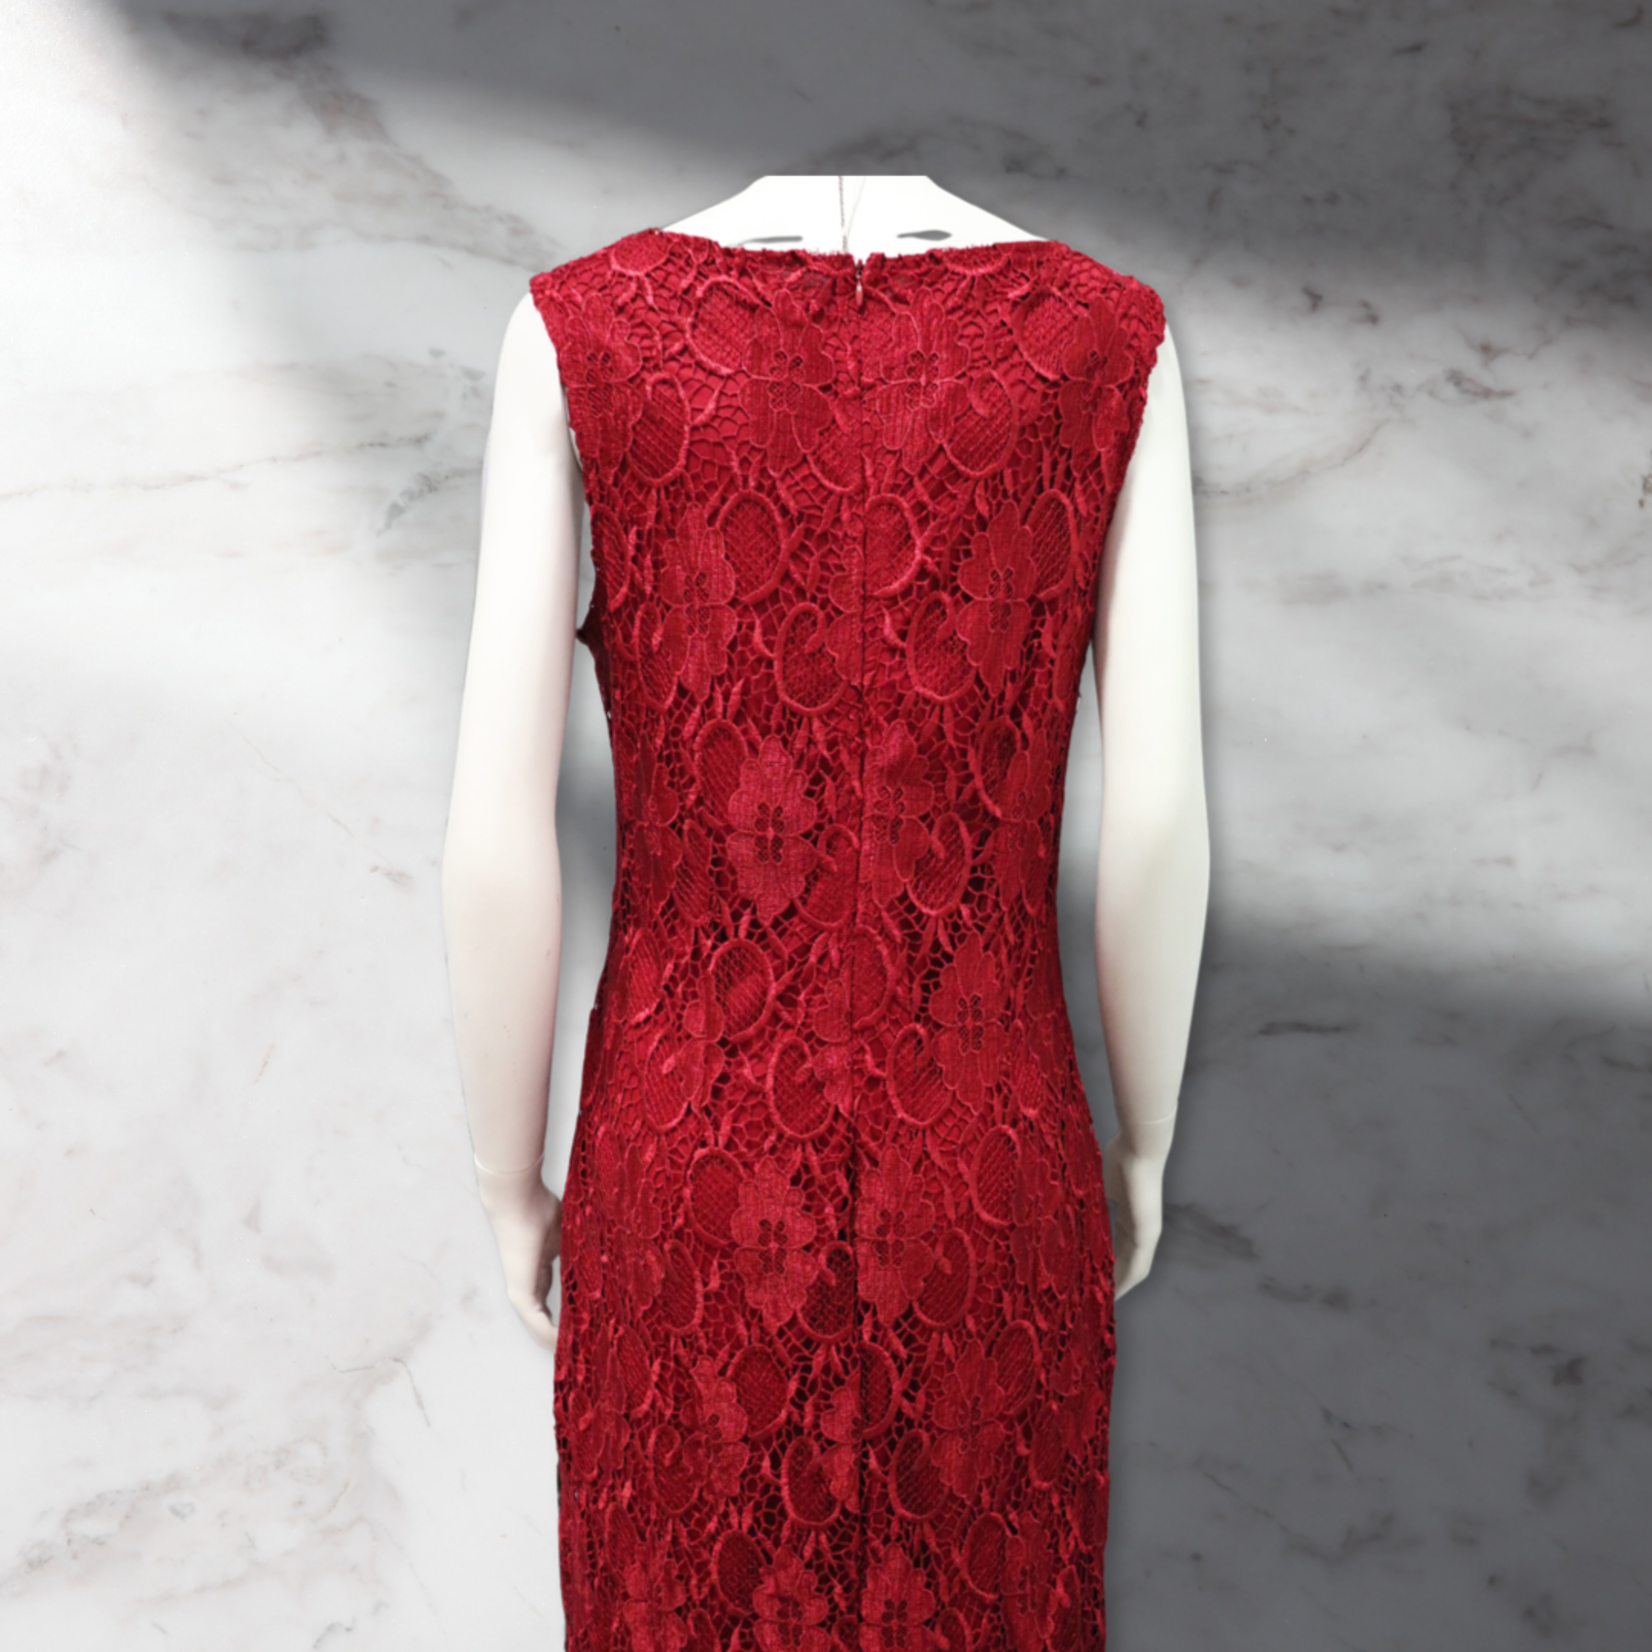 Red Woven Lace Dress - Size 14 - One ...